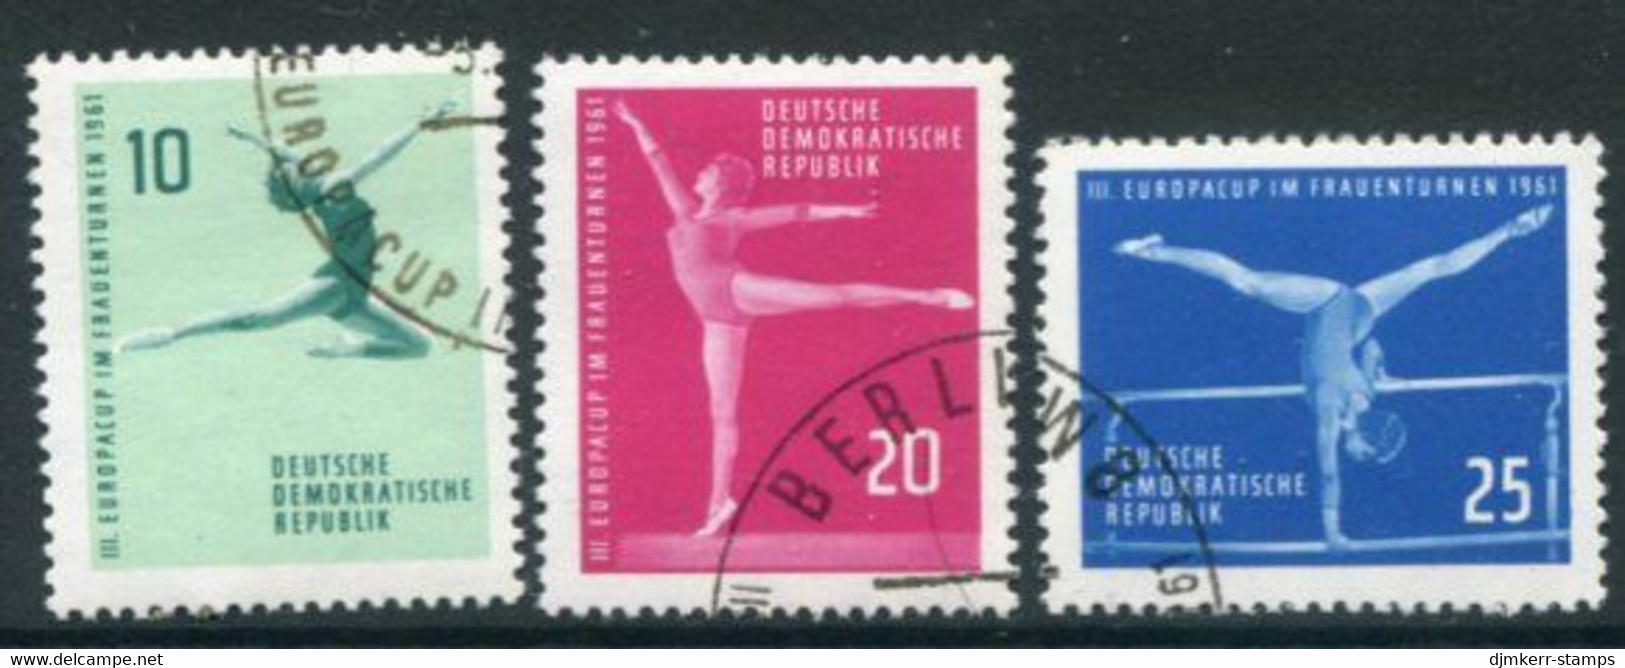 DDR / E. GERMANY 1961 Women's Gymnastics Used  Michel  830-32 - Used Stamps